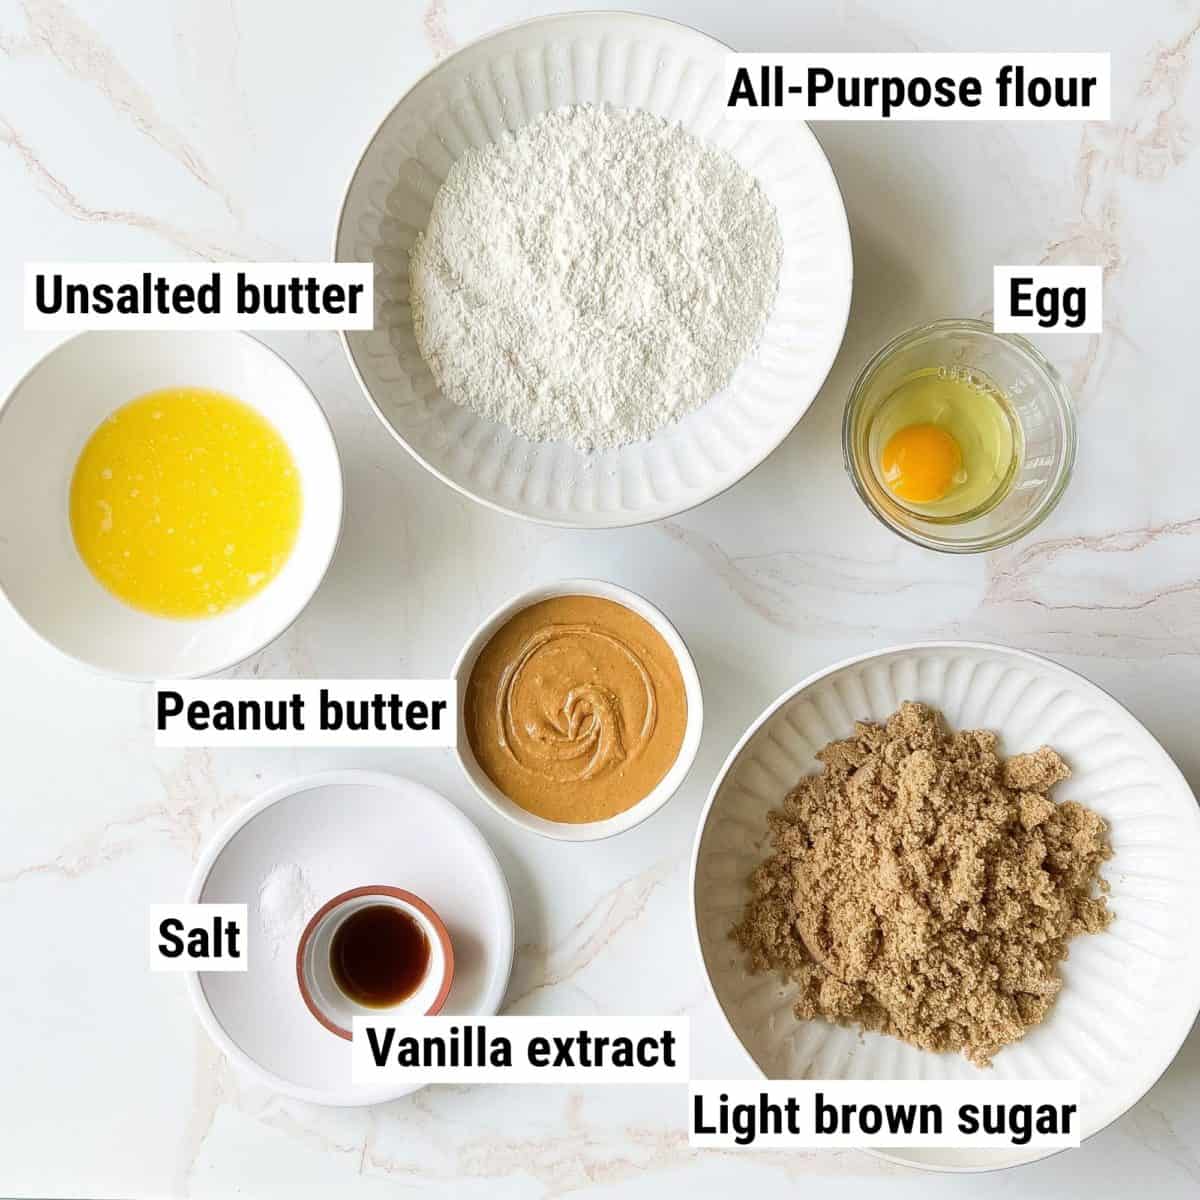 The ingredients used to make peanut butter blondies spread out on a table.